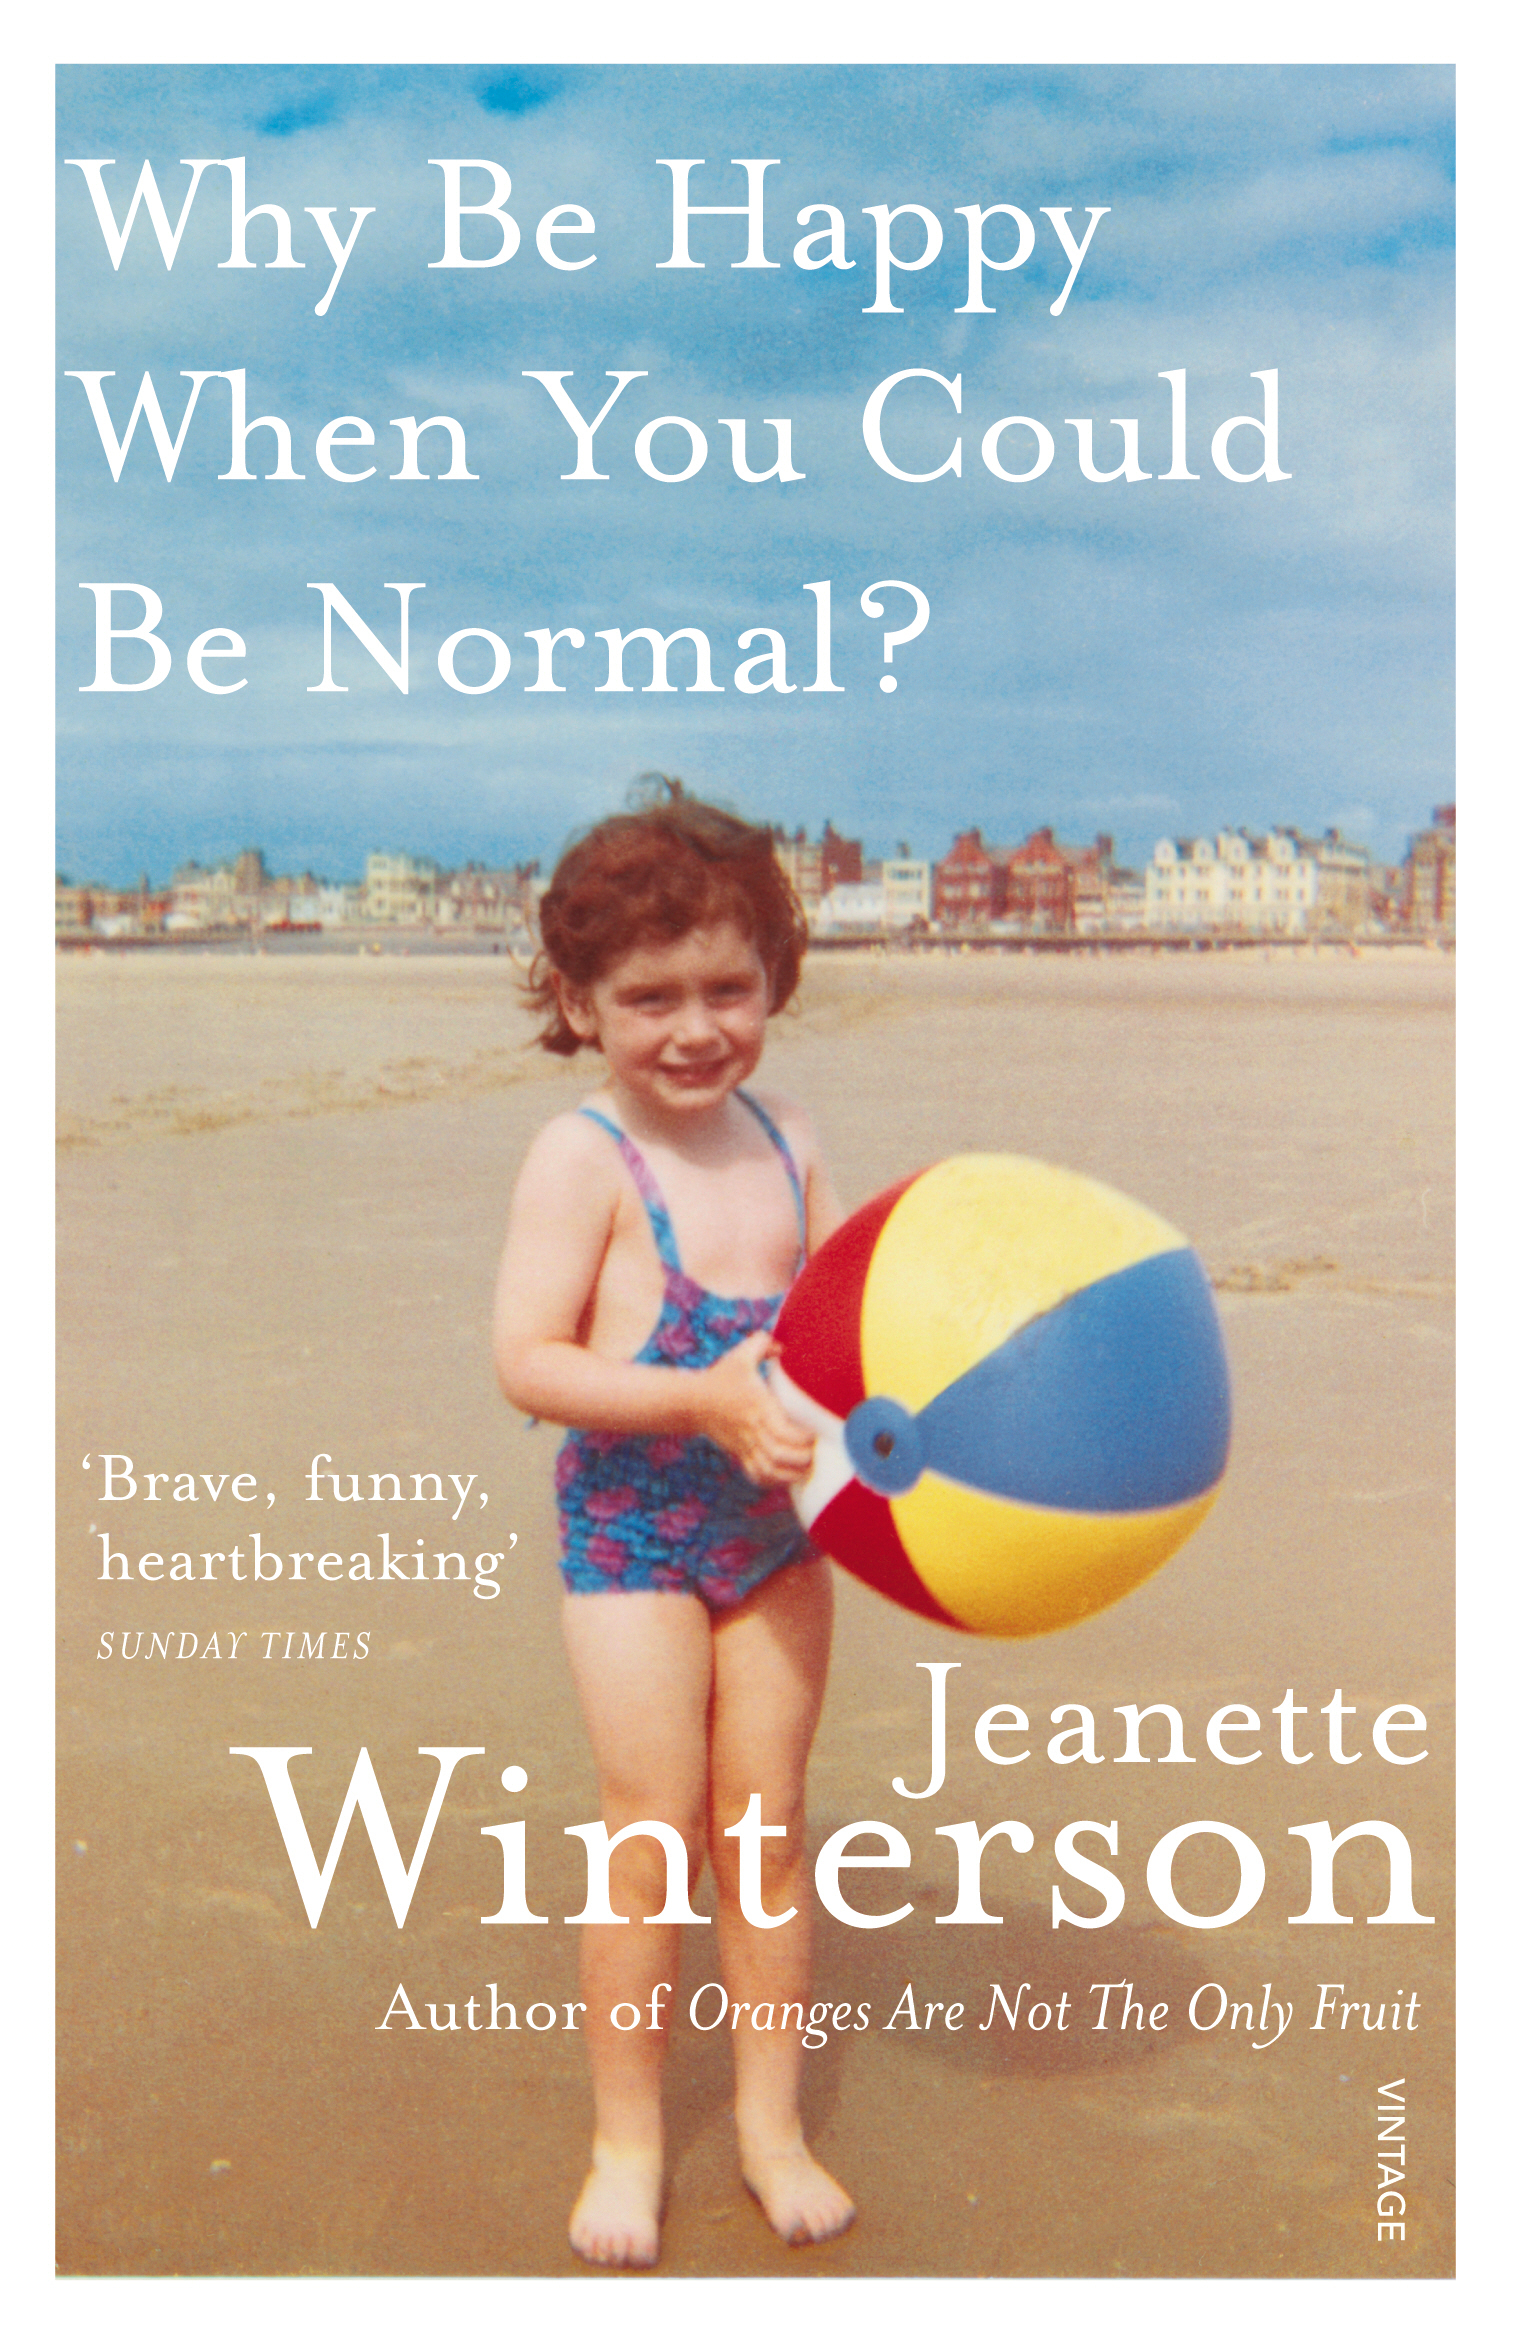 Why Be Happy When You Can Be Normal by Jeanette Winterson